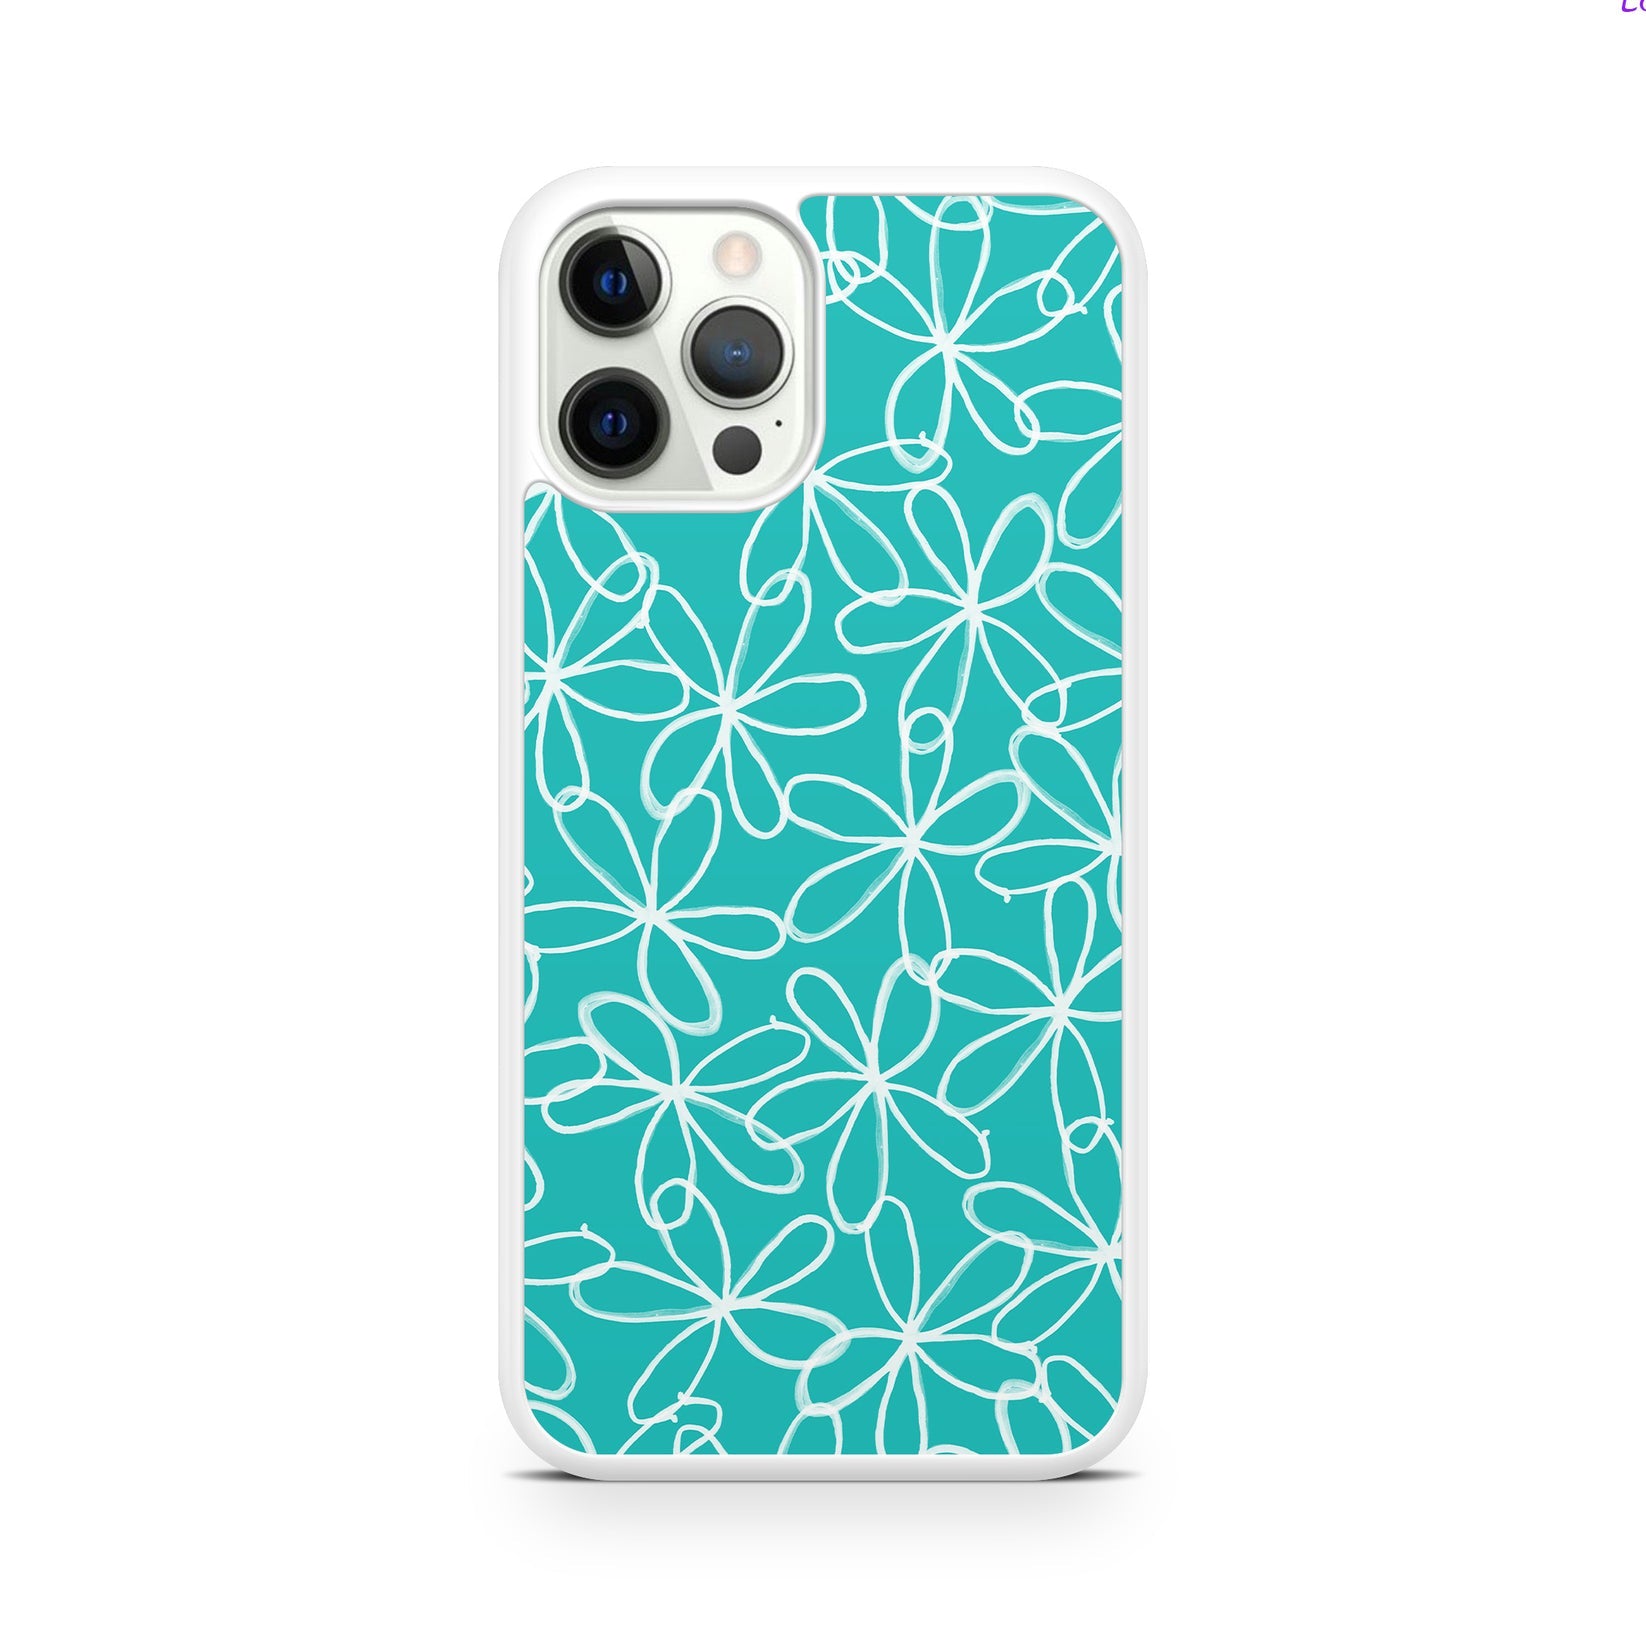 Blue and white sketchy floral print phone case